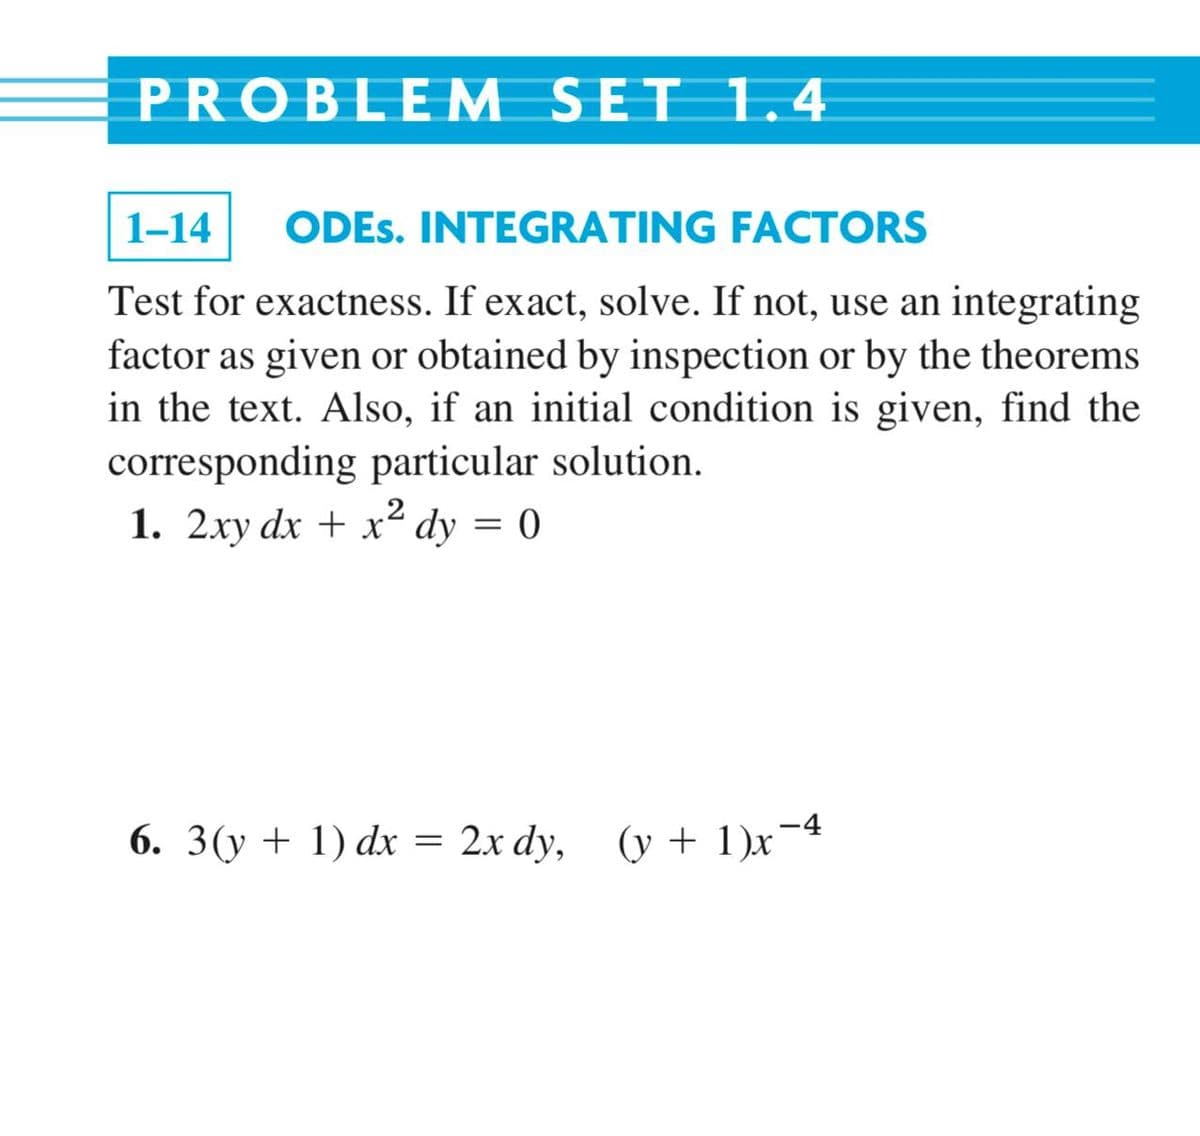 PROBLEM SET 1.4
1-14
ODES. INTEGRATING FACTORS
Test for exactness. If exact, solve. If not, use an integrating
factor as given or obtained by inspection or by the theorems
in the text. Also, if an initial condition is given, find the
corresponding particular solution.
1. 2xy dx + x² dy = 0
6. 3(y + 1) dx = 2x dy, (y + 1)x¯